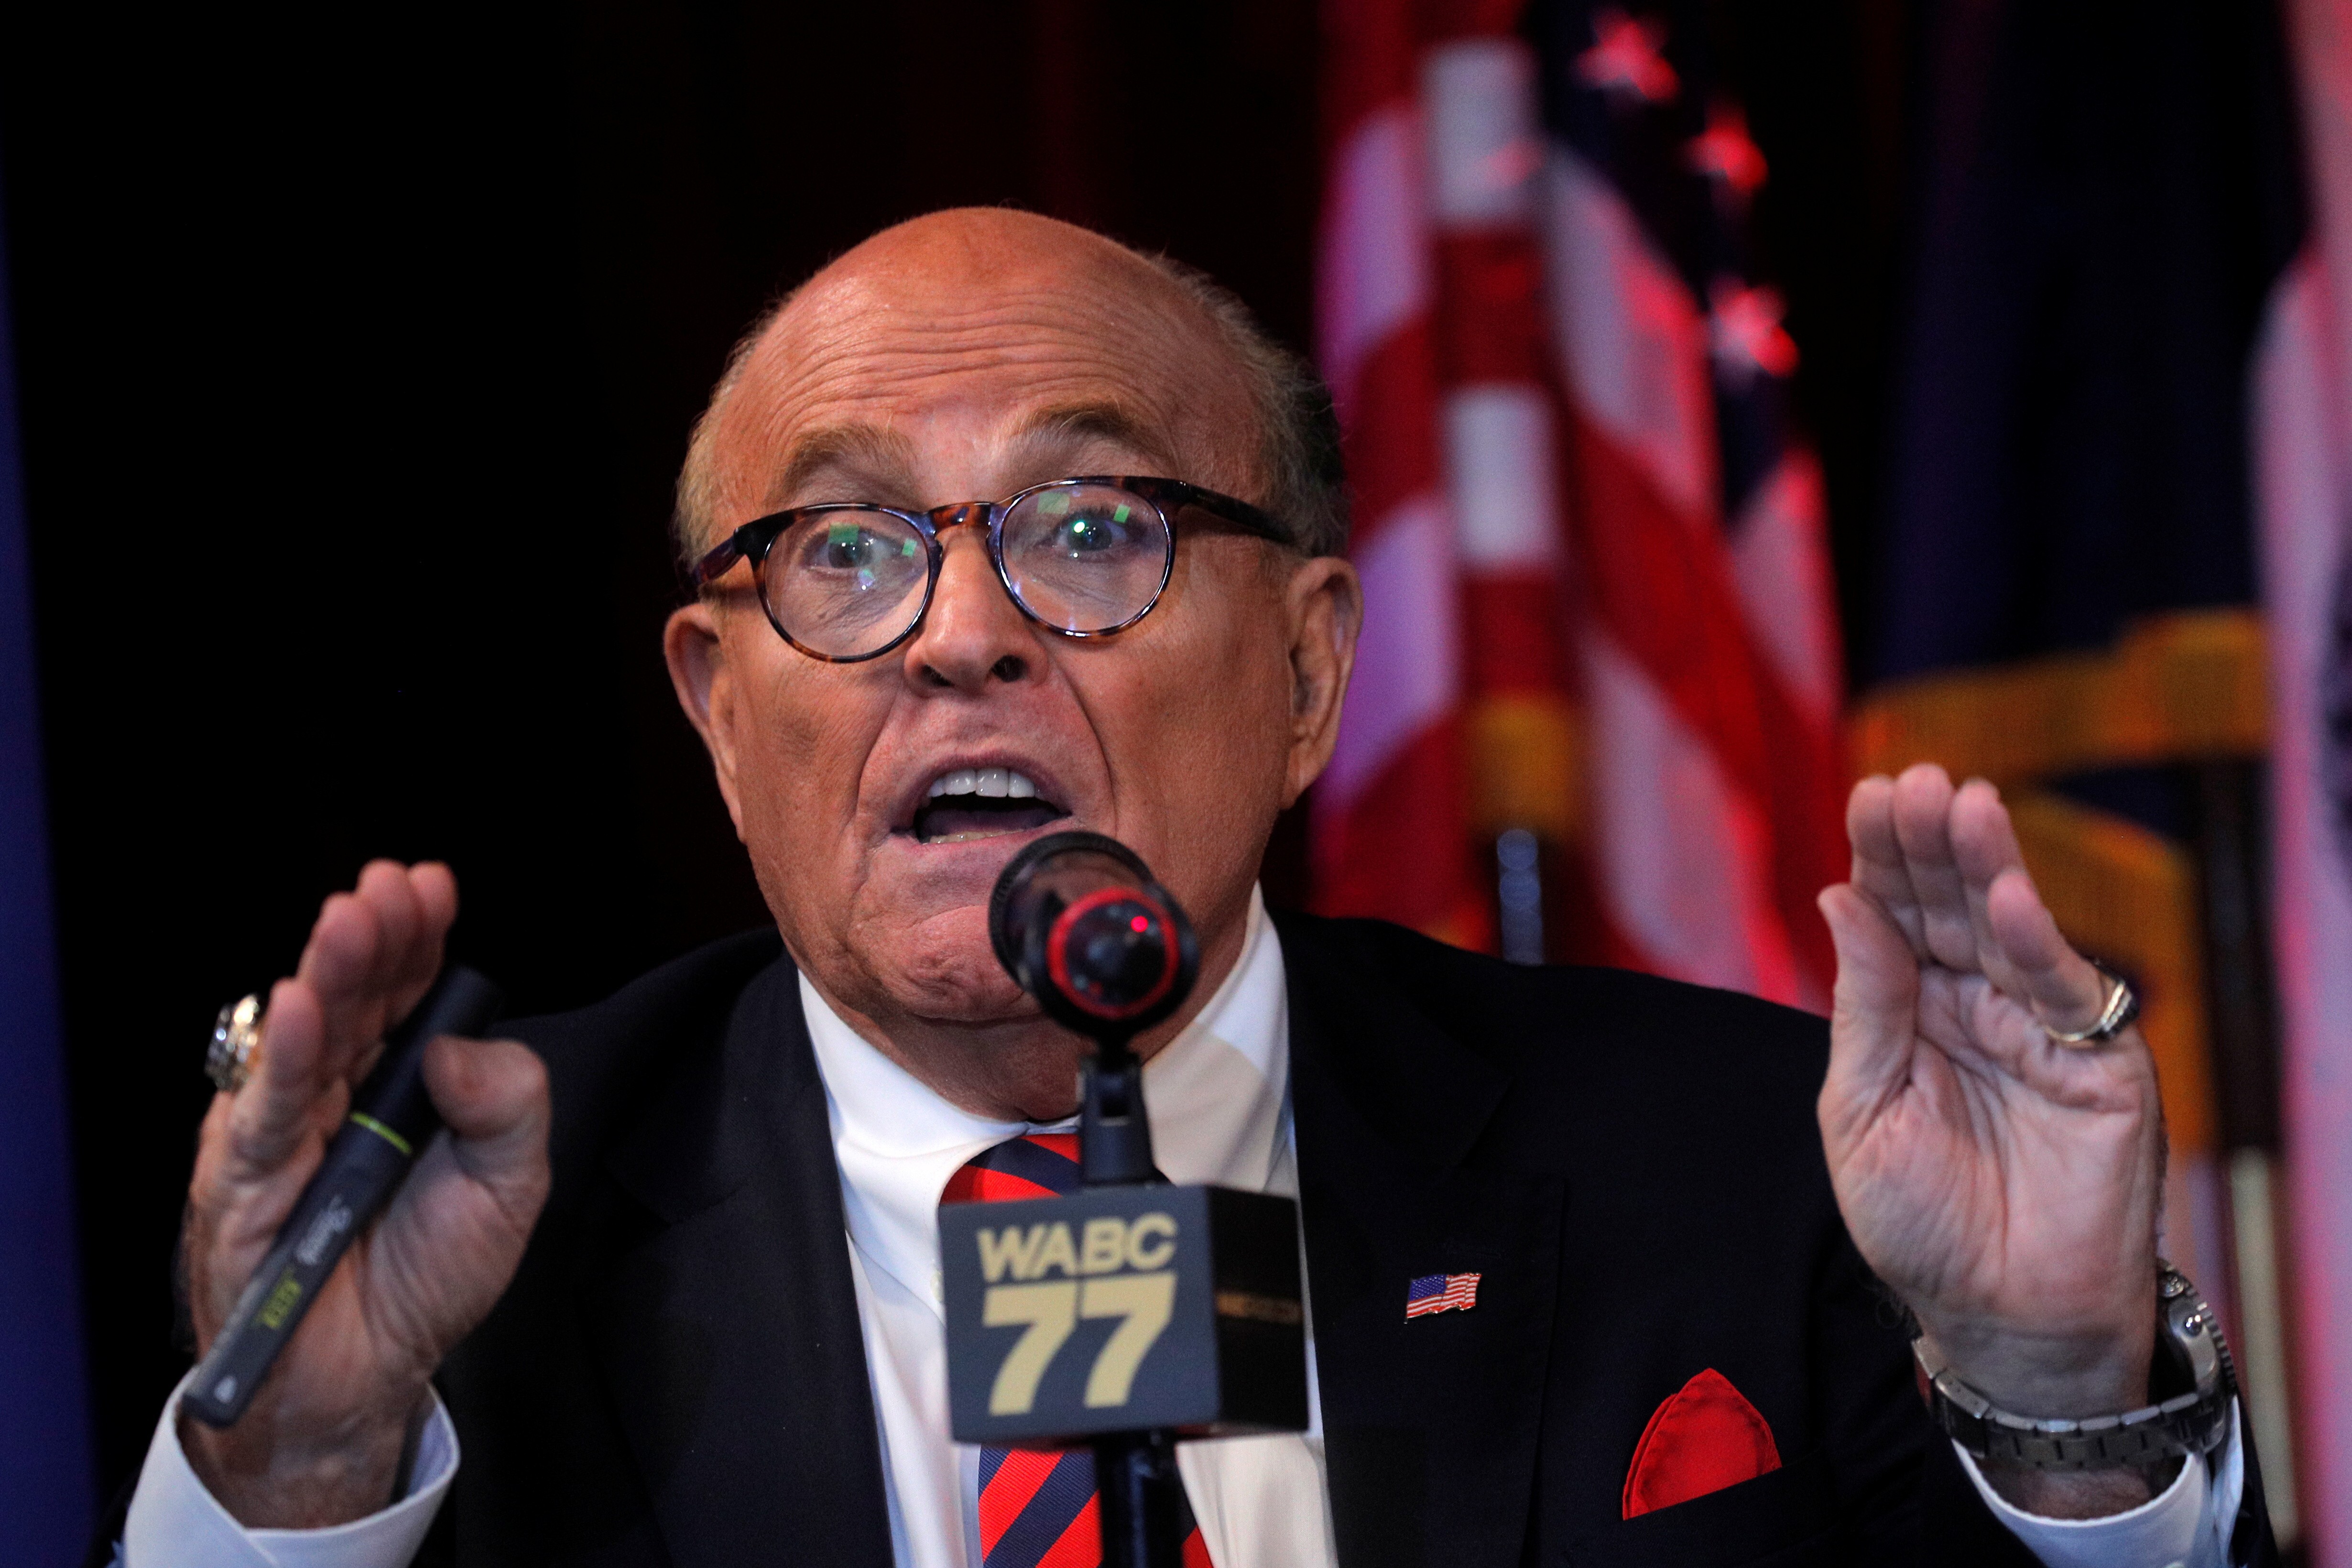 Former New York City mayor Rudy Giuliani speaks about the 20th anniversary of the September 11, 2001 attacks, during an appearance on a radio show in Manhattan. Photo: Reuters